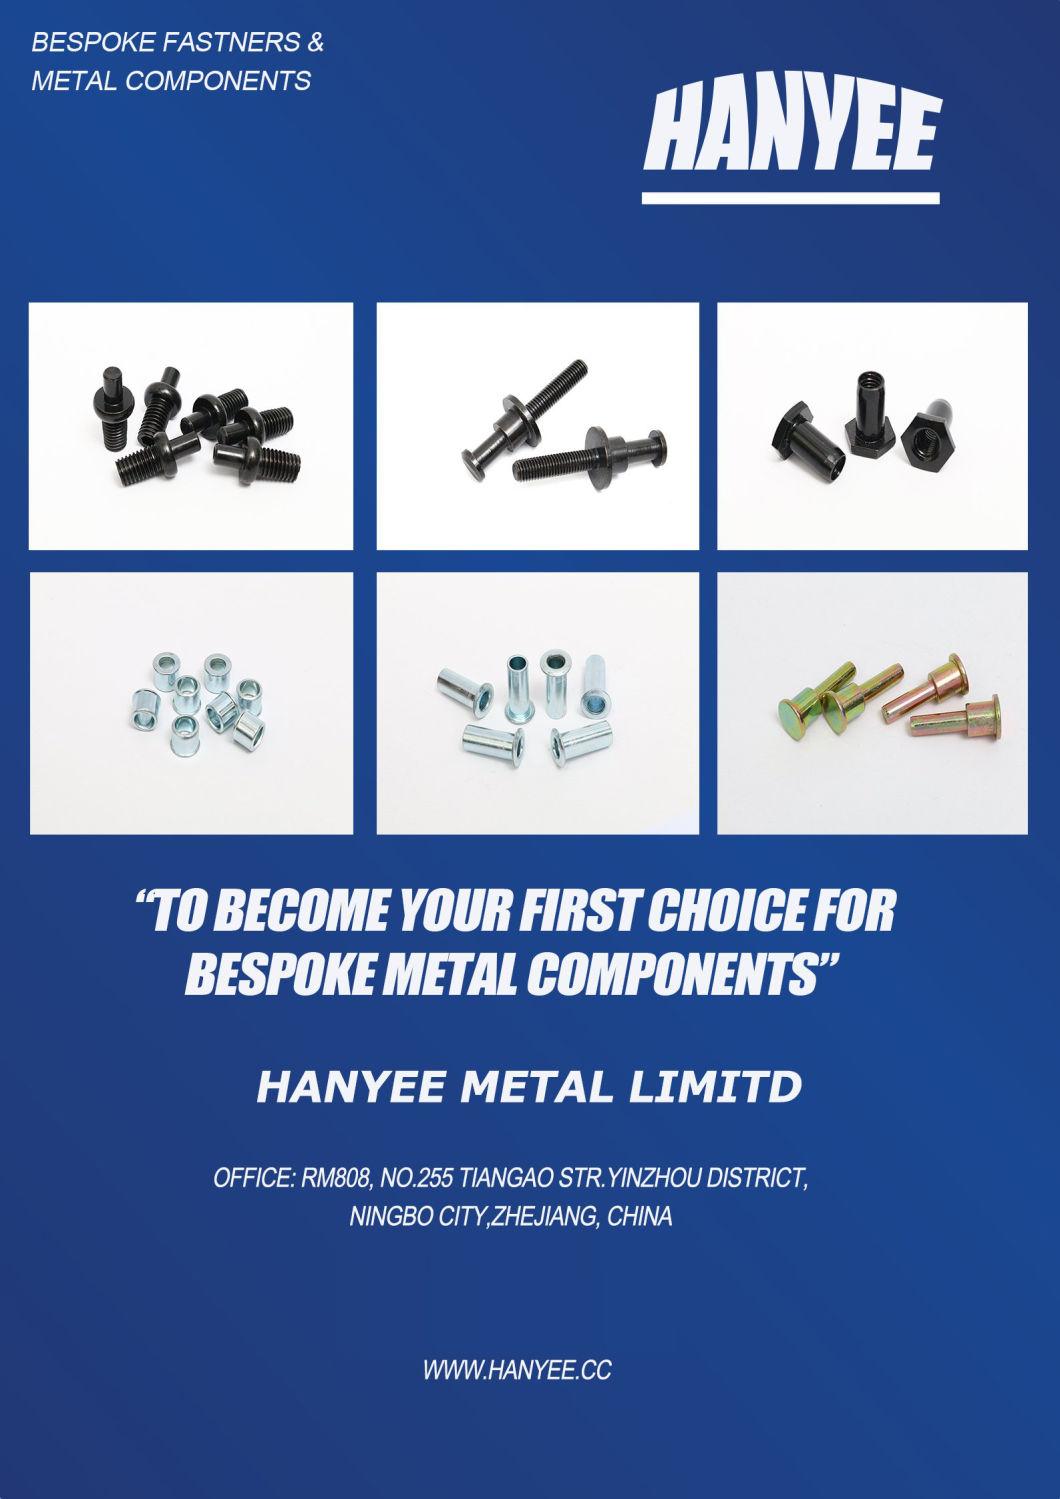 High Quantity Ni Plating Delivery 15-30days Customized Rivet for Machinery by Hanyee Metal